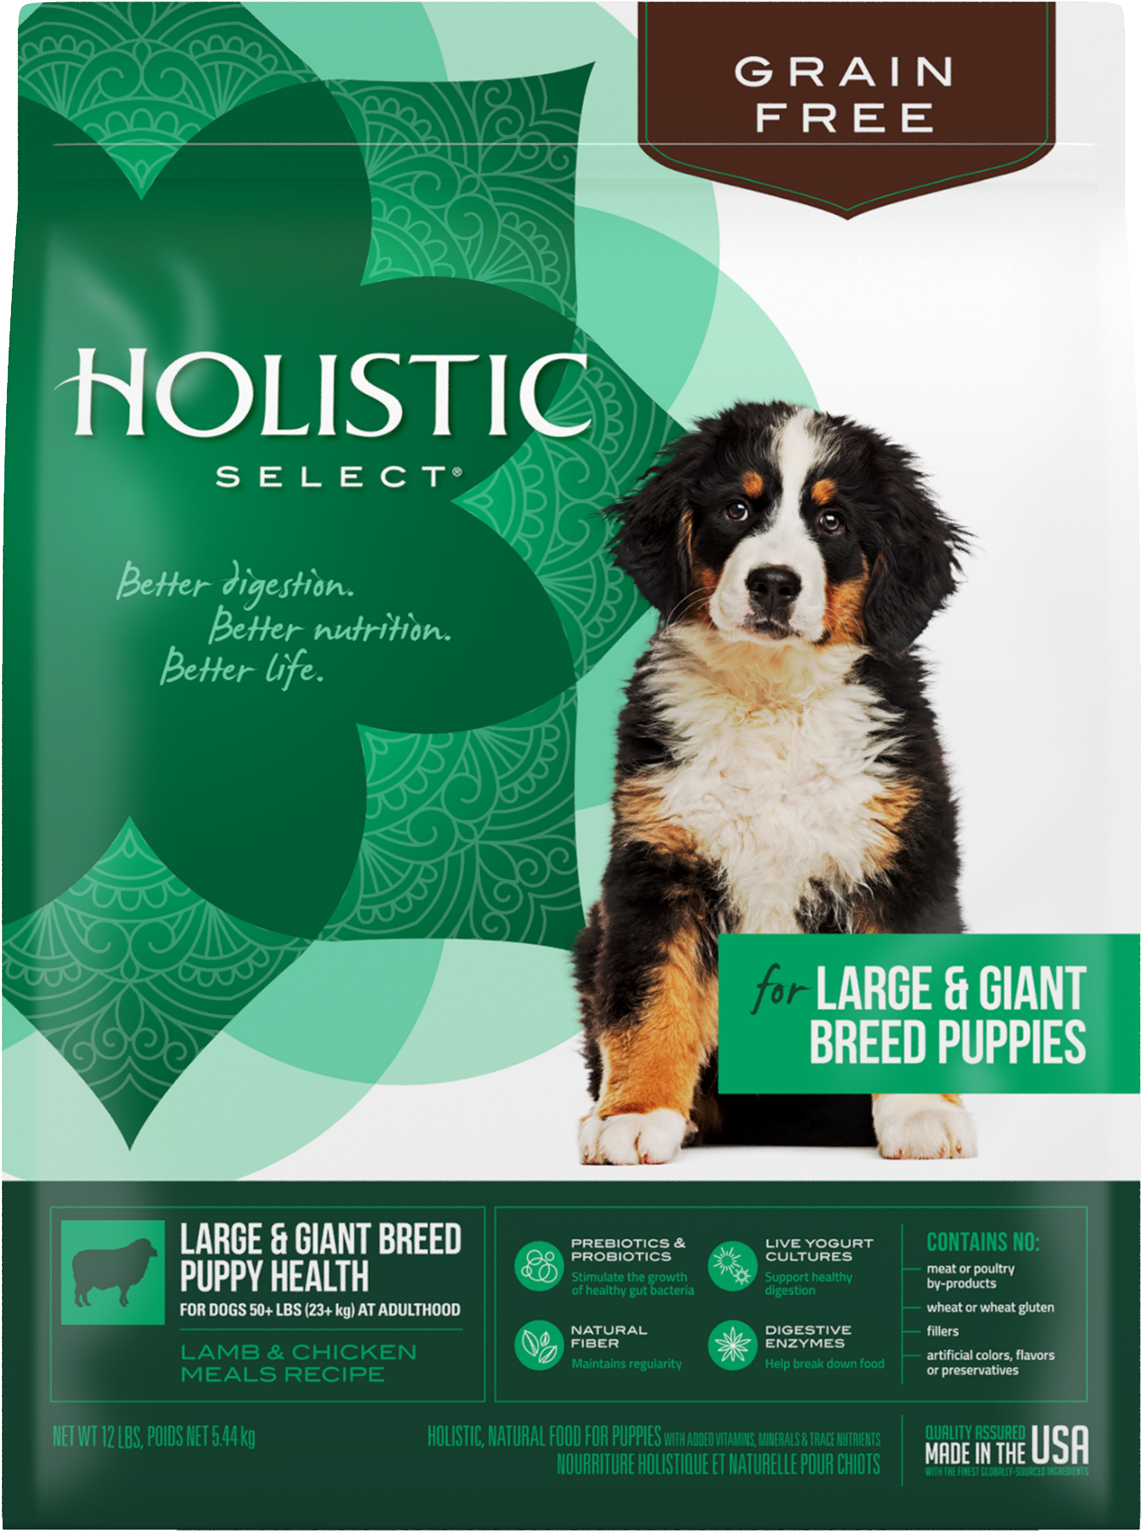 Grain Free Large & Giant Breed Puppy product packaging image thumbnail 2